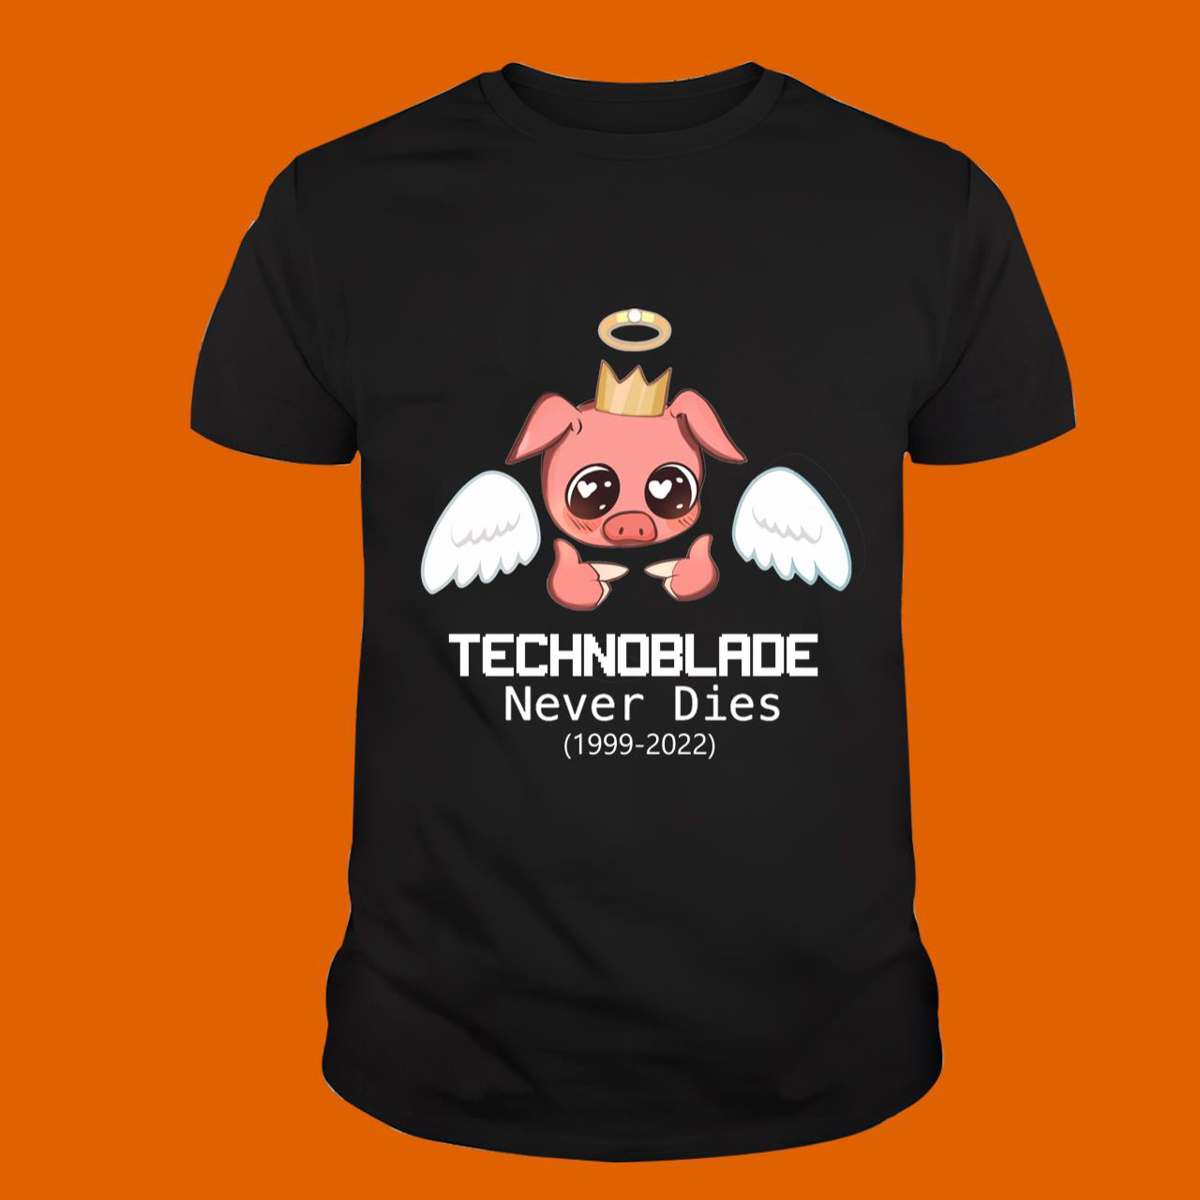 Technoblade Never Dies 1999-2022 Shirts